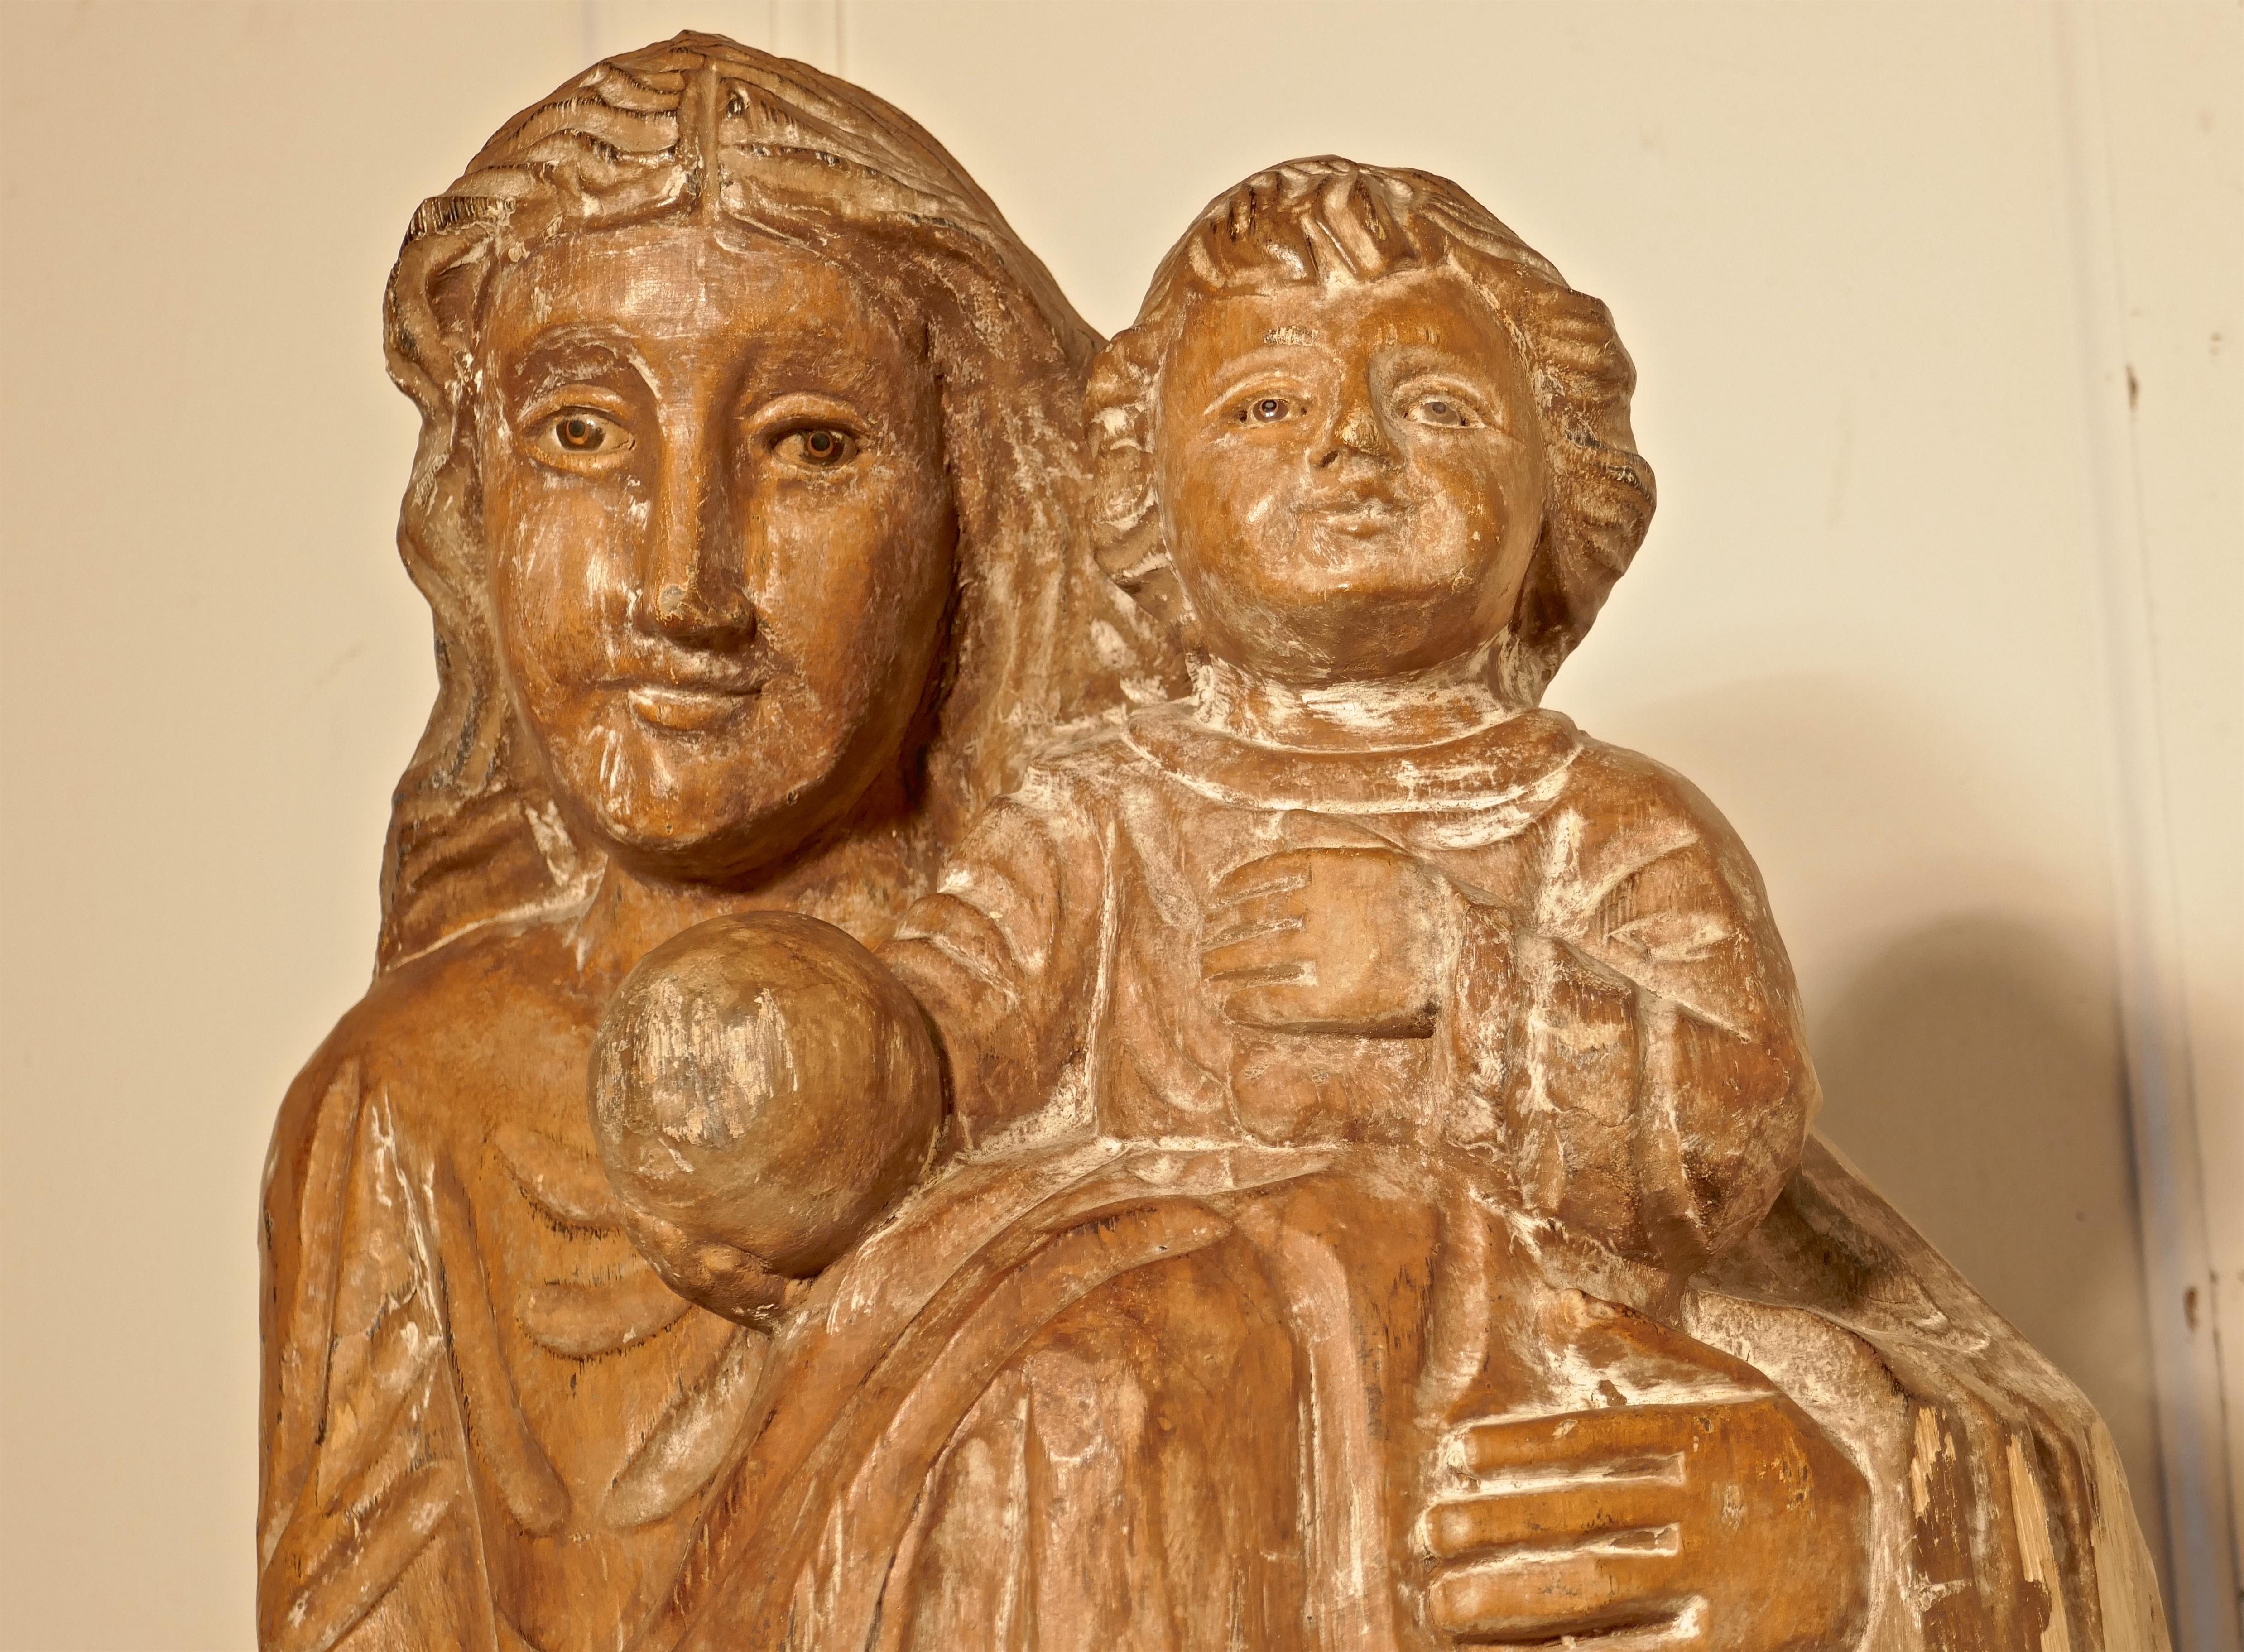 18th century French carved statue of Madonna and Child.

This charming piece has been rescued from a ecclesiastic clear out in the southern part of France
The statue is carved from one piece of hard wood, it shows the smiling Madonna holding the